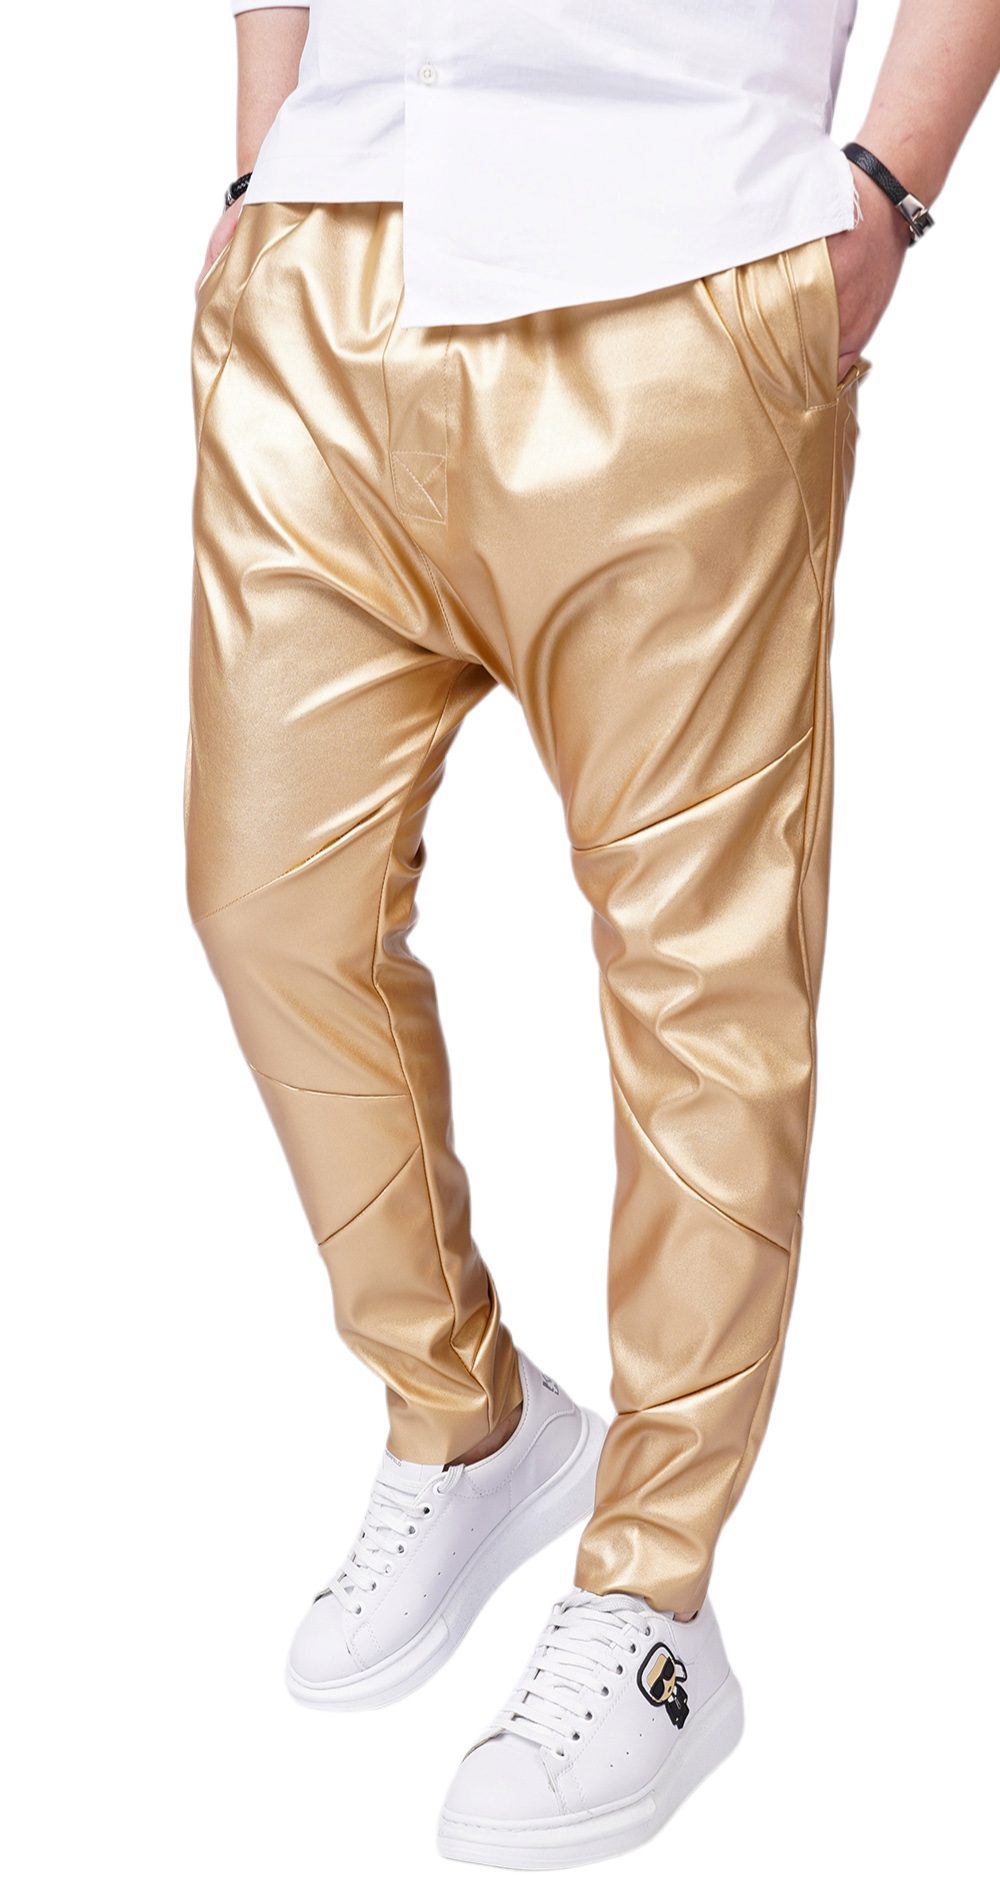 Exclusive GOLD LEATHER PANTS - NOT FOR EVERYONE MPL6103